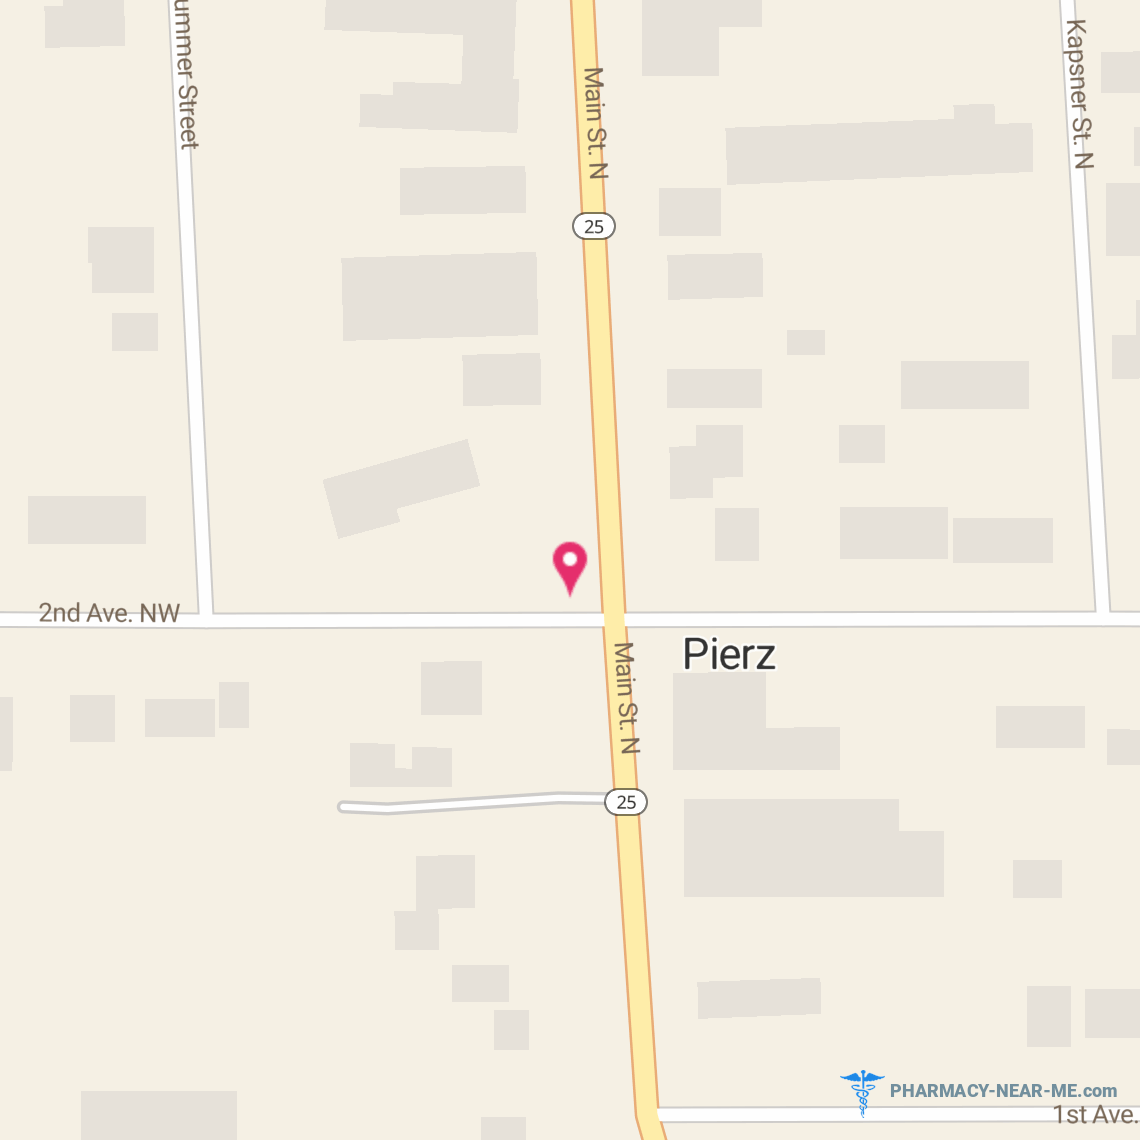 WOLFF DRUG - Pharmacy Hours, Phone, Reviews & Information: 207 Main Street South, Pierz, Minnesota 56364, United States